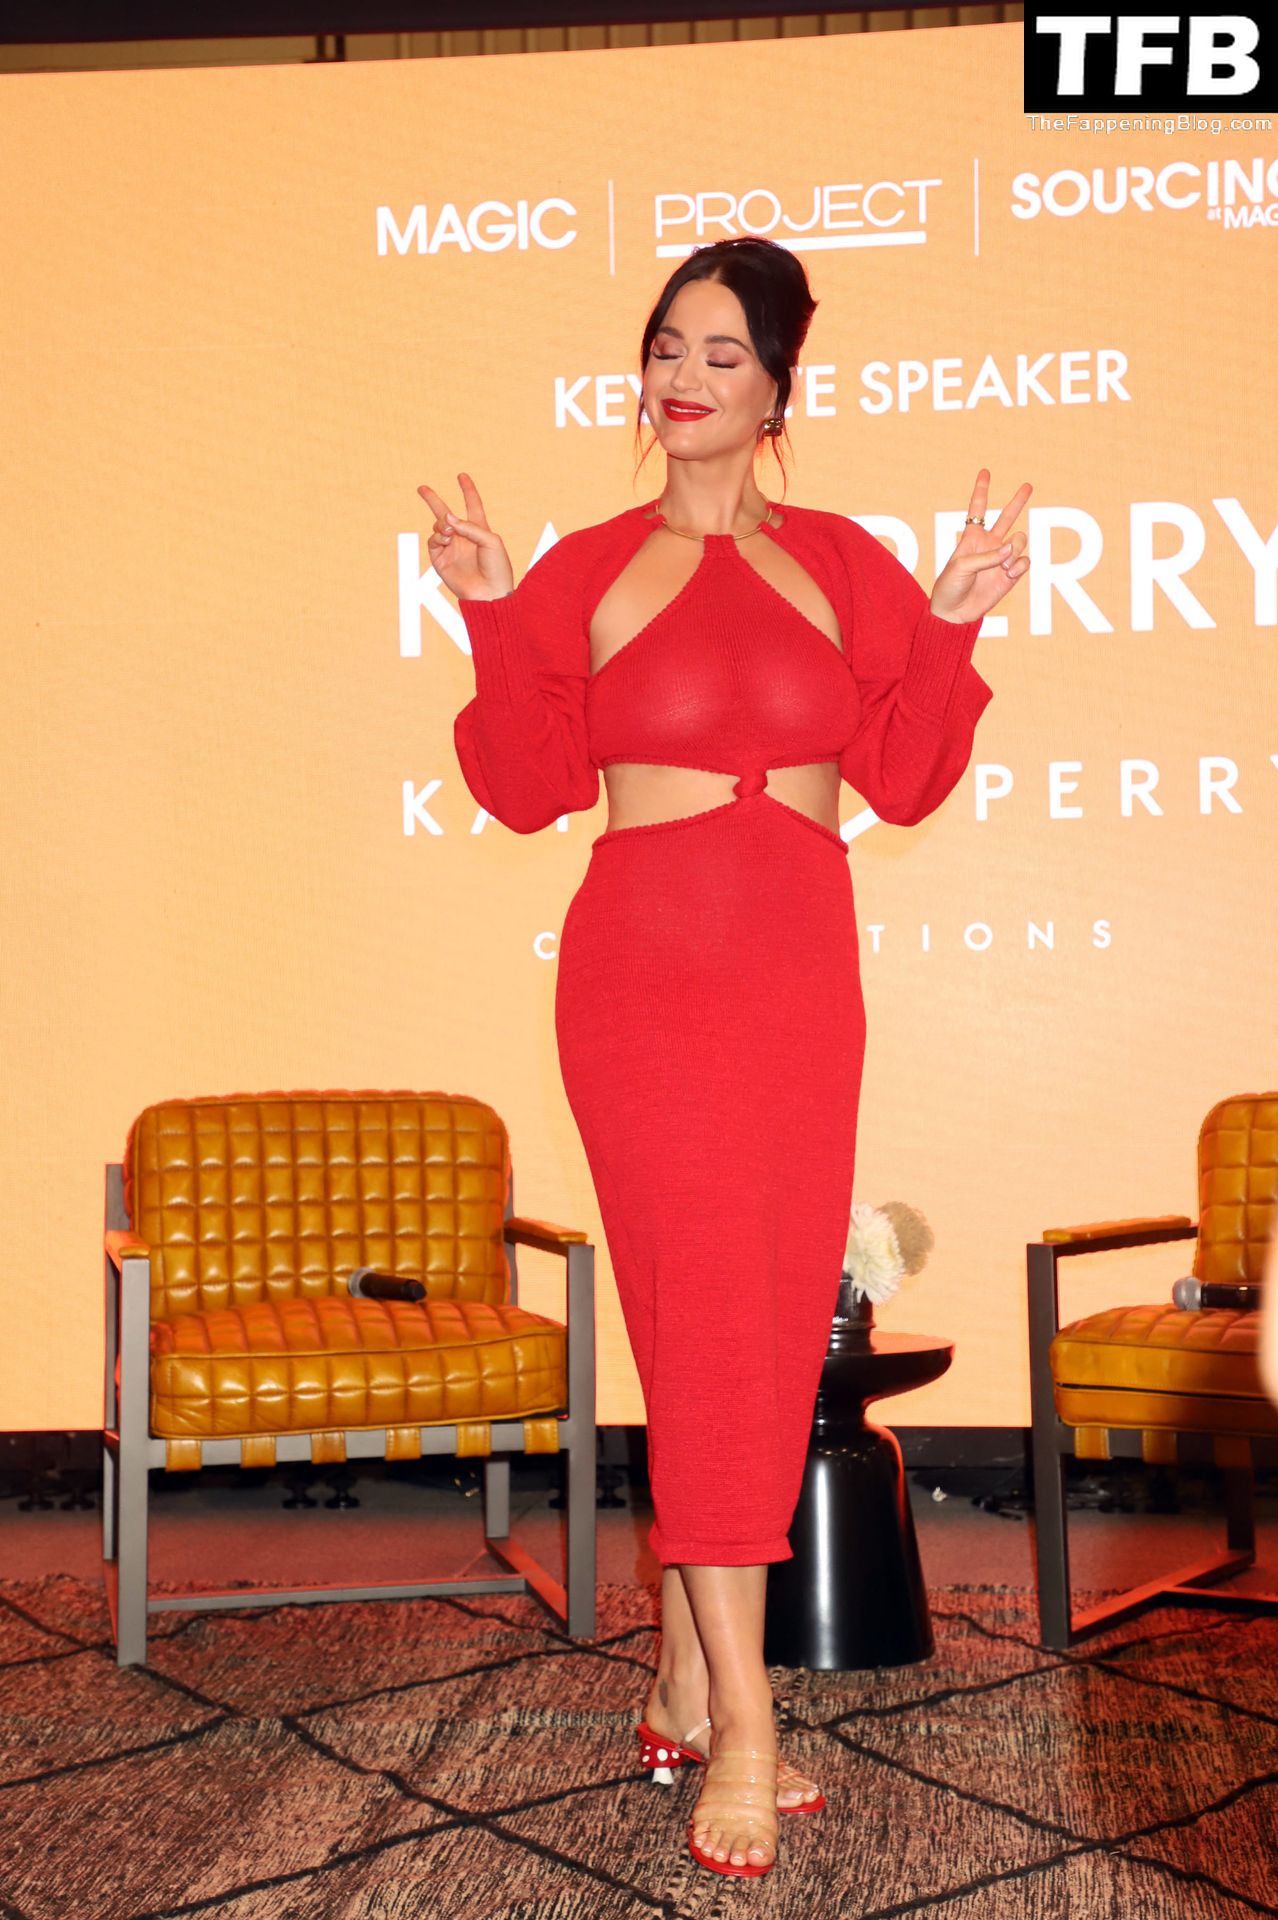 Katy Perry Sexy Tits Feet The Fappening Blog 36 - Katy Perry & Kristin Cavallari Deliver Keynote Speeches with Host Rachel McCord at Day 2 of Magic Las Vegas (44 Photos)